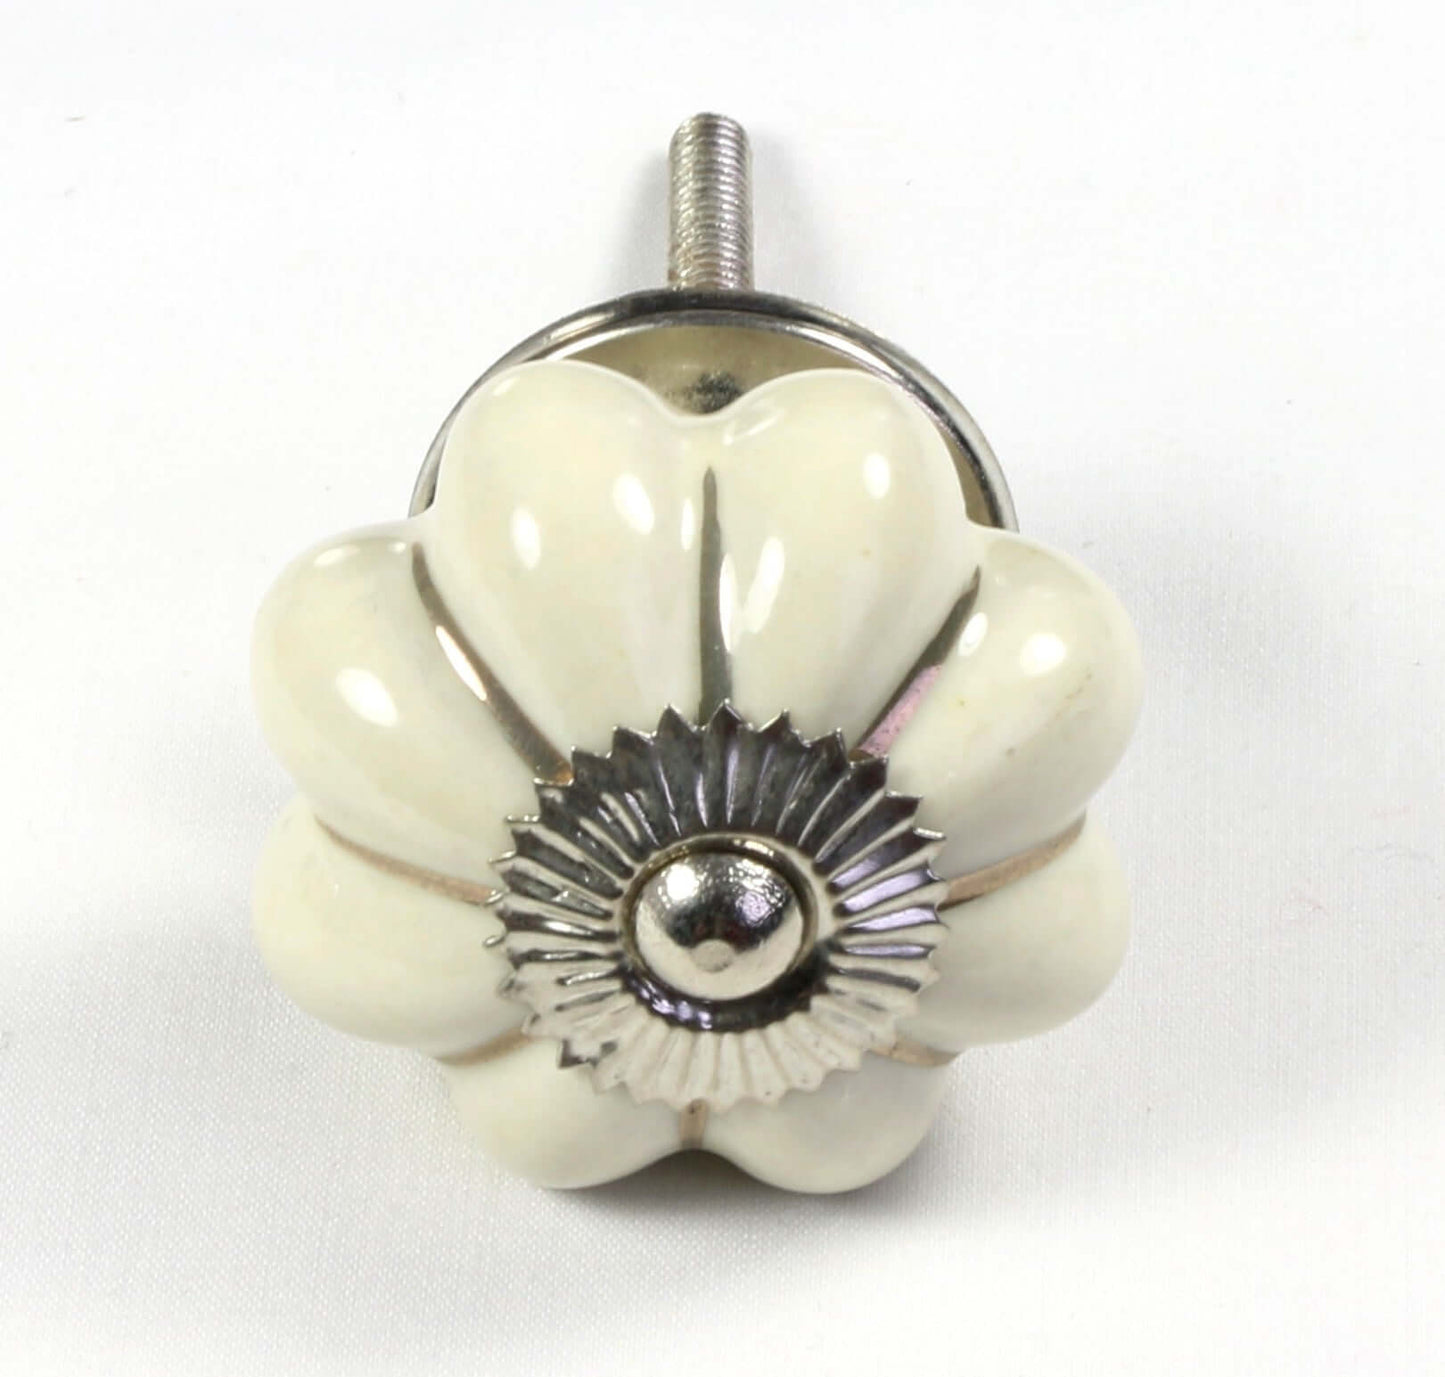 Ceramic Knob Ivory with Silver Lines Flower Shape